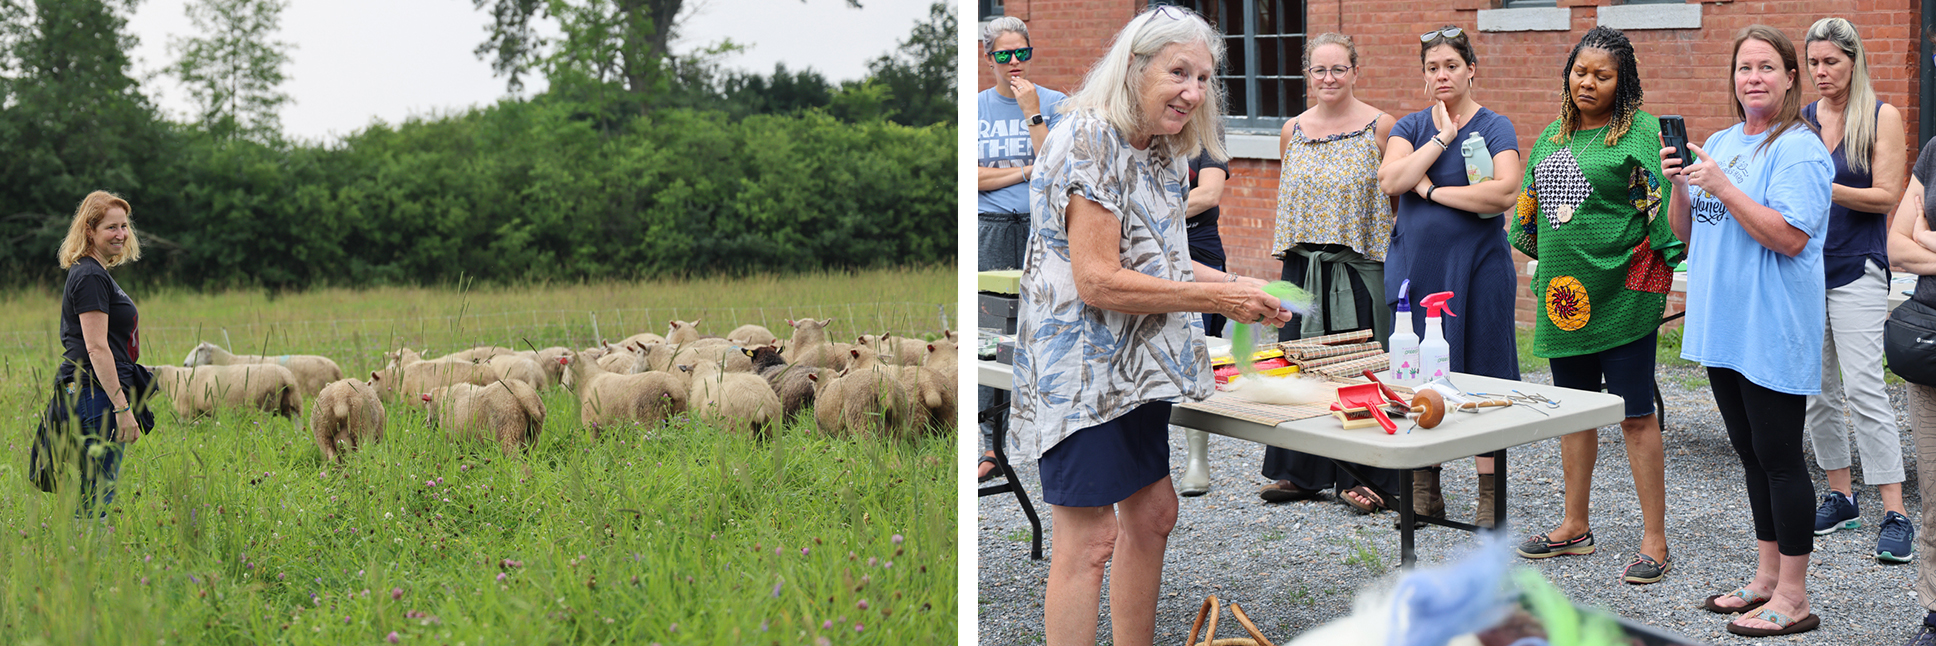 A collage of two images: A woman stands in a grass pasture, smiling, near a herd of sheep in summertime, and a group of adults gathers in a brick courtyard watching a felting demonstration